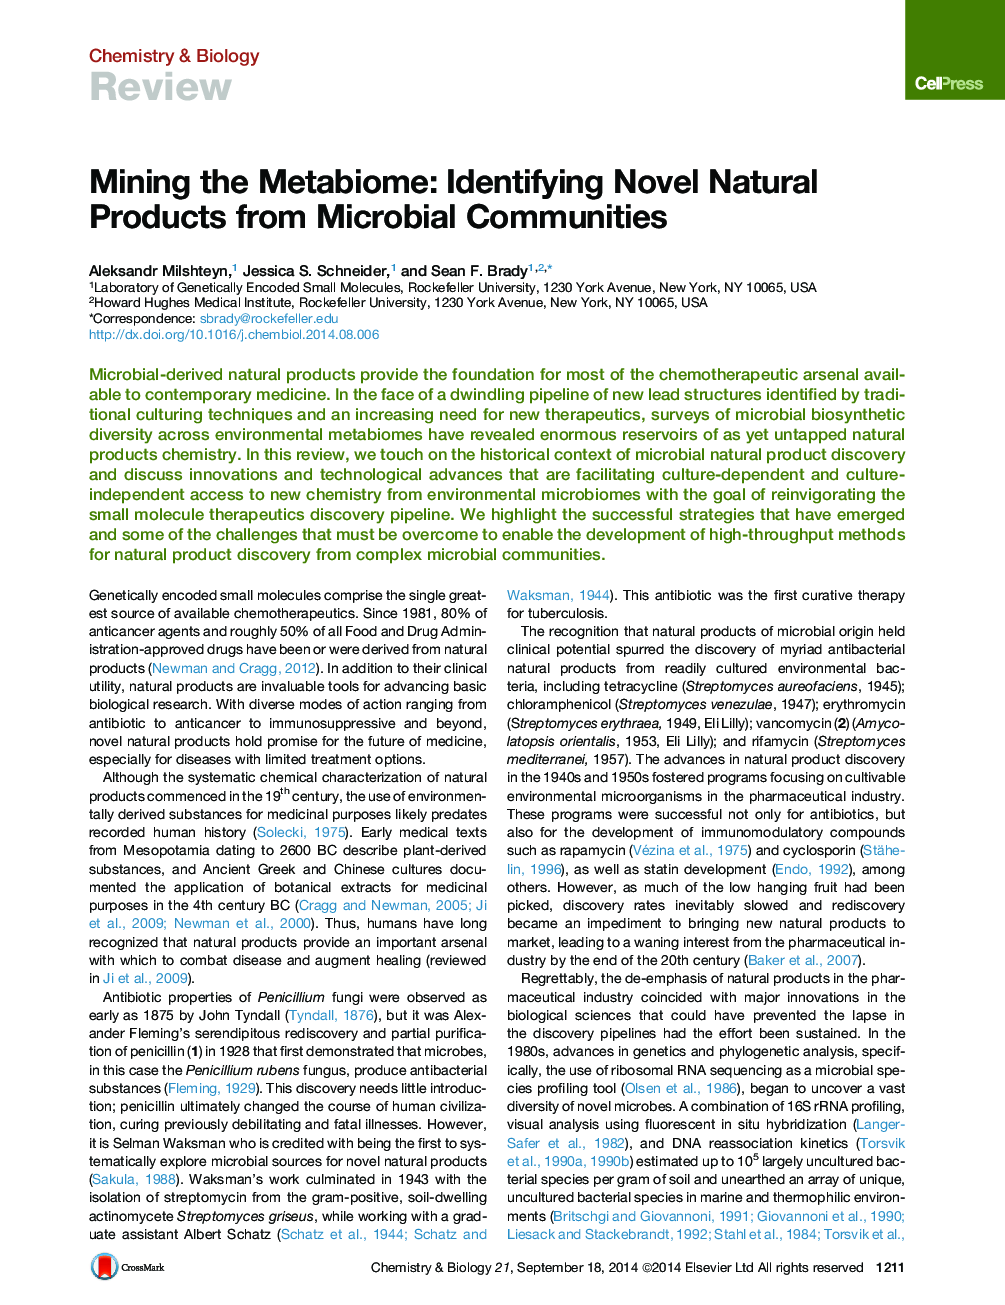 Mining the Metabiome: Identifying Novel Natural Products from Microbial Communities